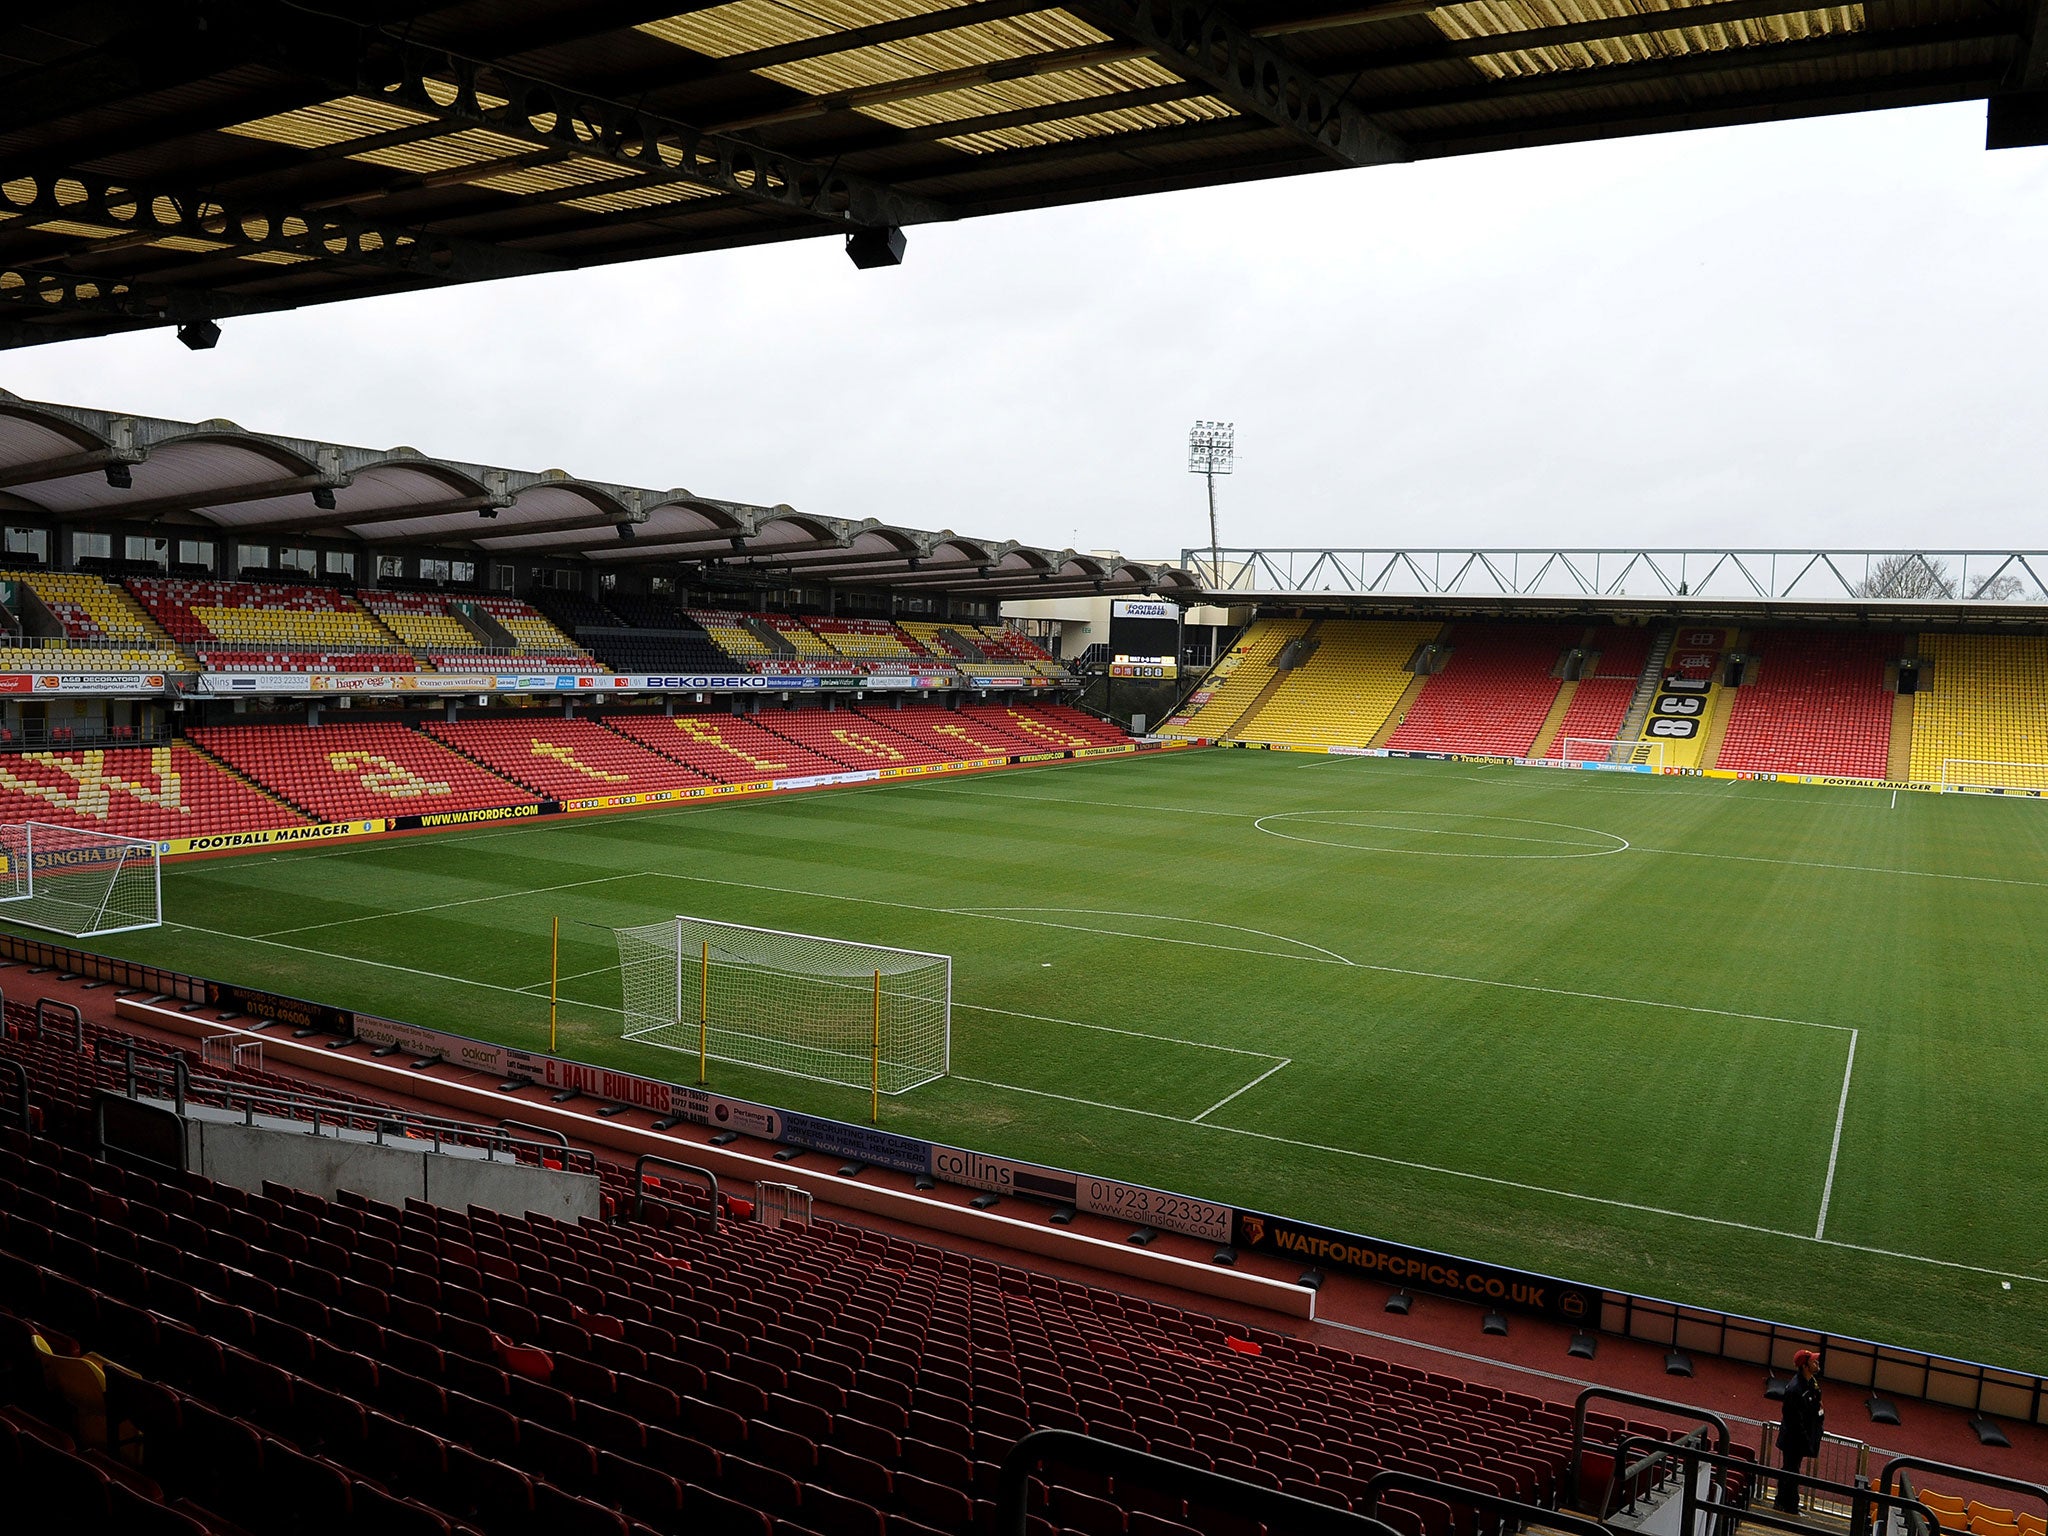 A view of Vicarage Road